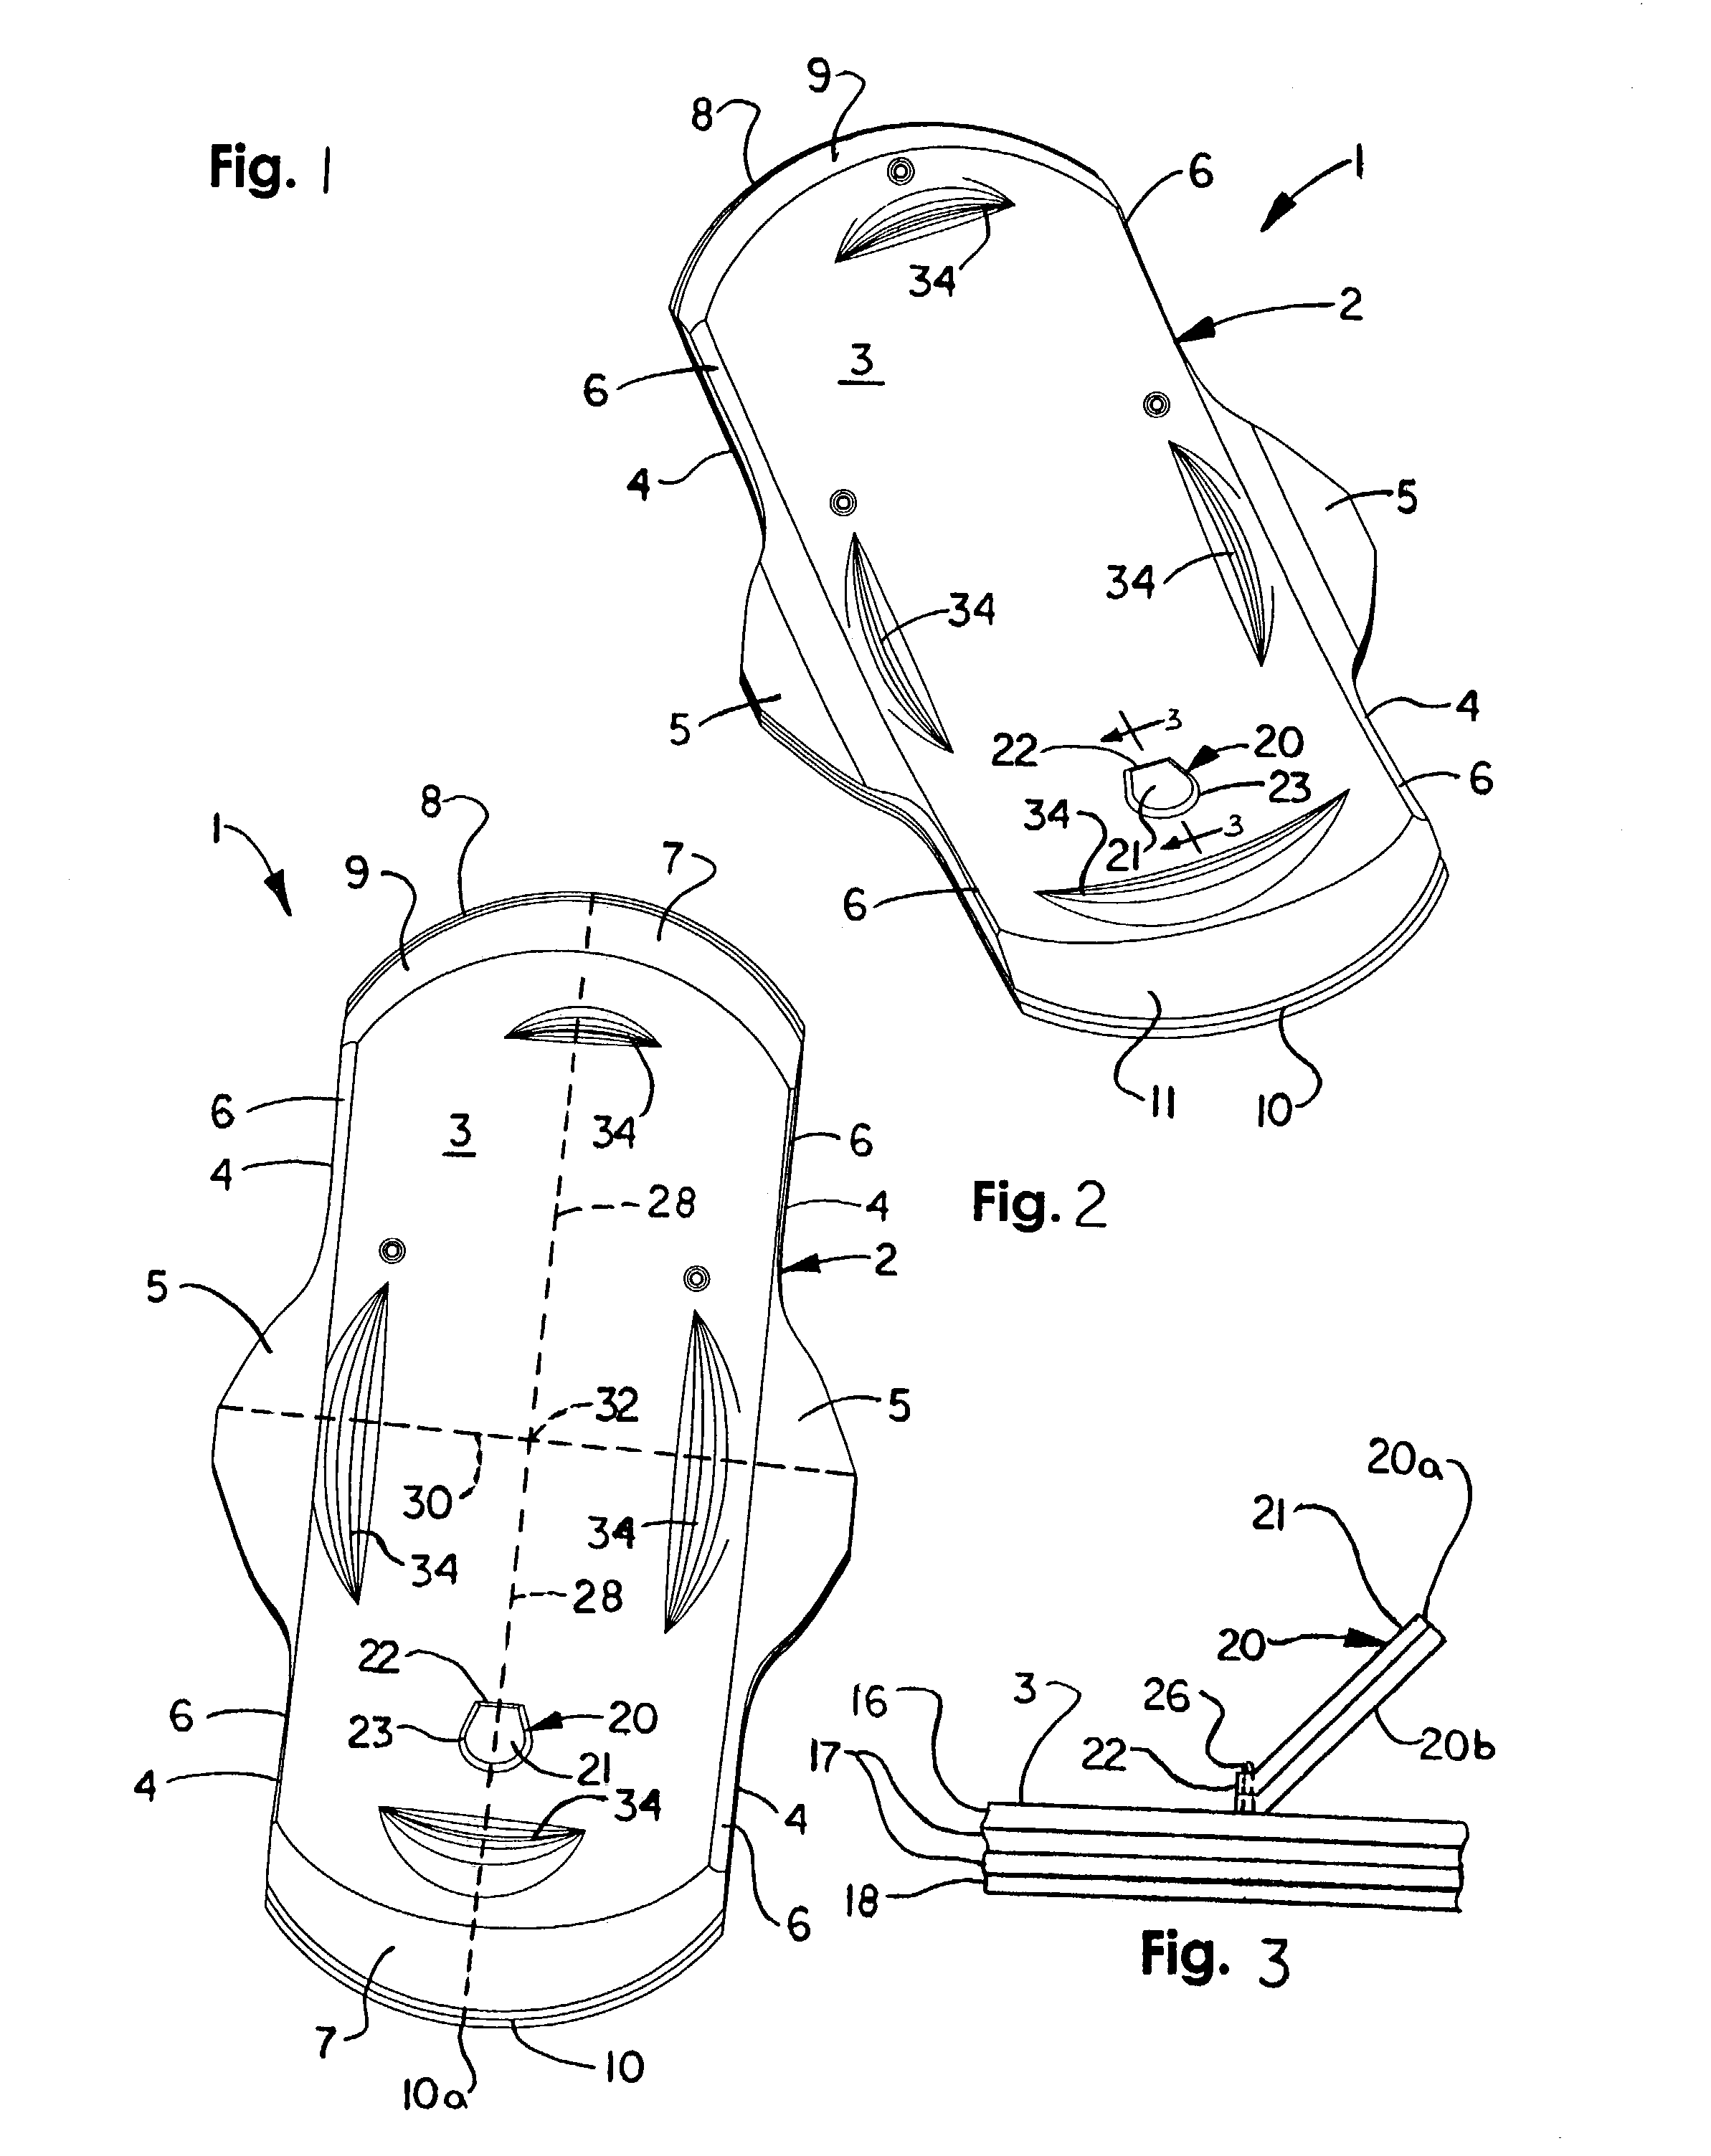 Sanitary napkin with absorbent tab